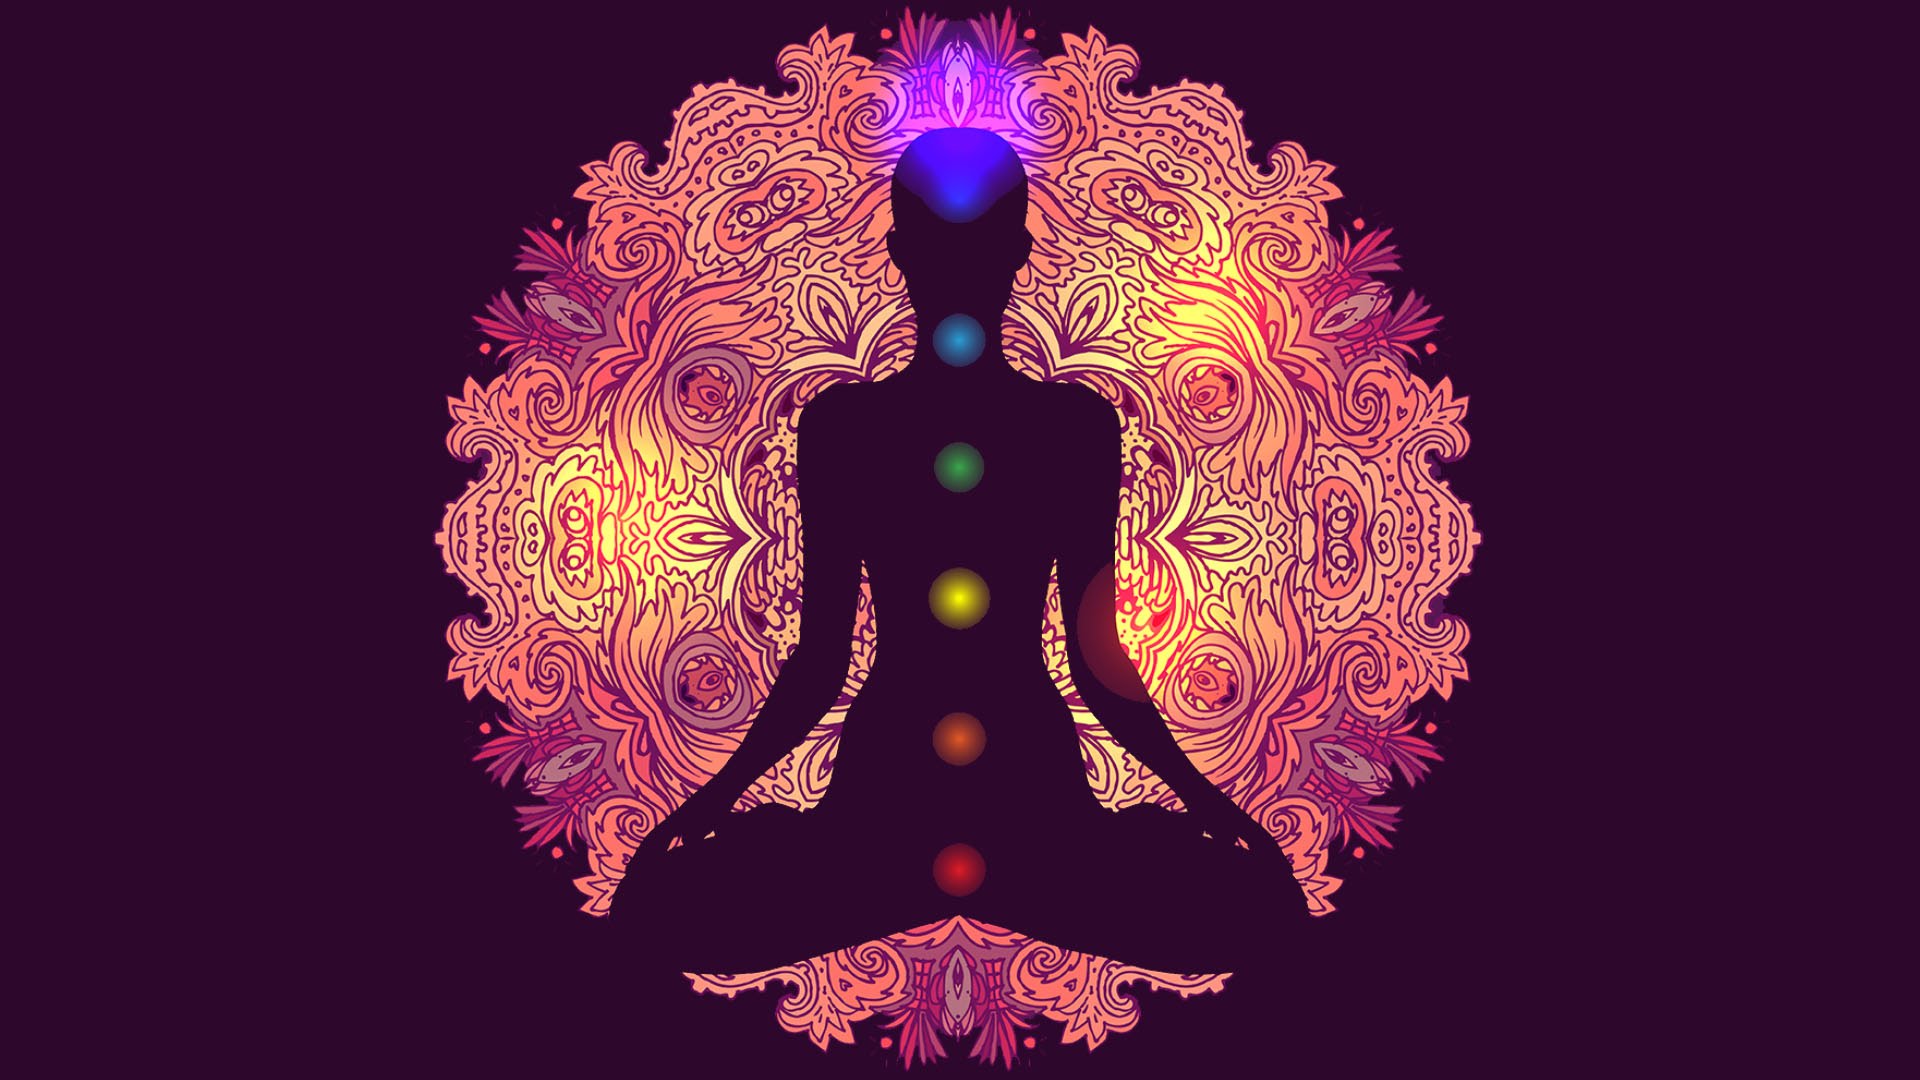 What are the uses of chakras in Buddhism? 5